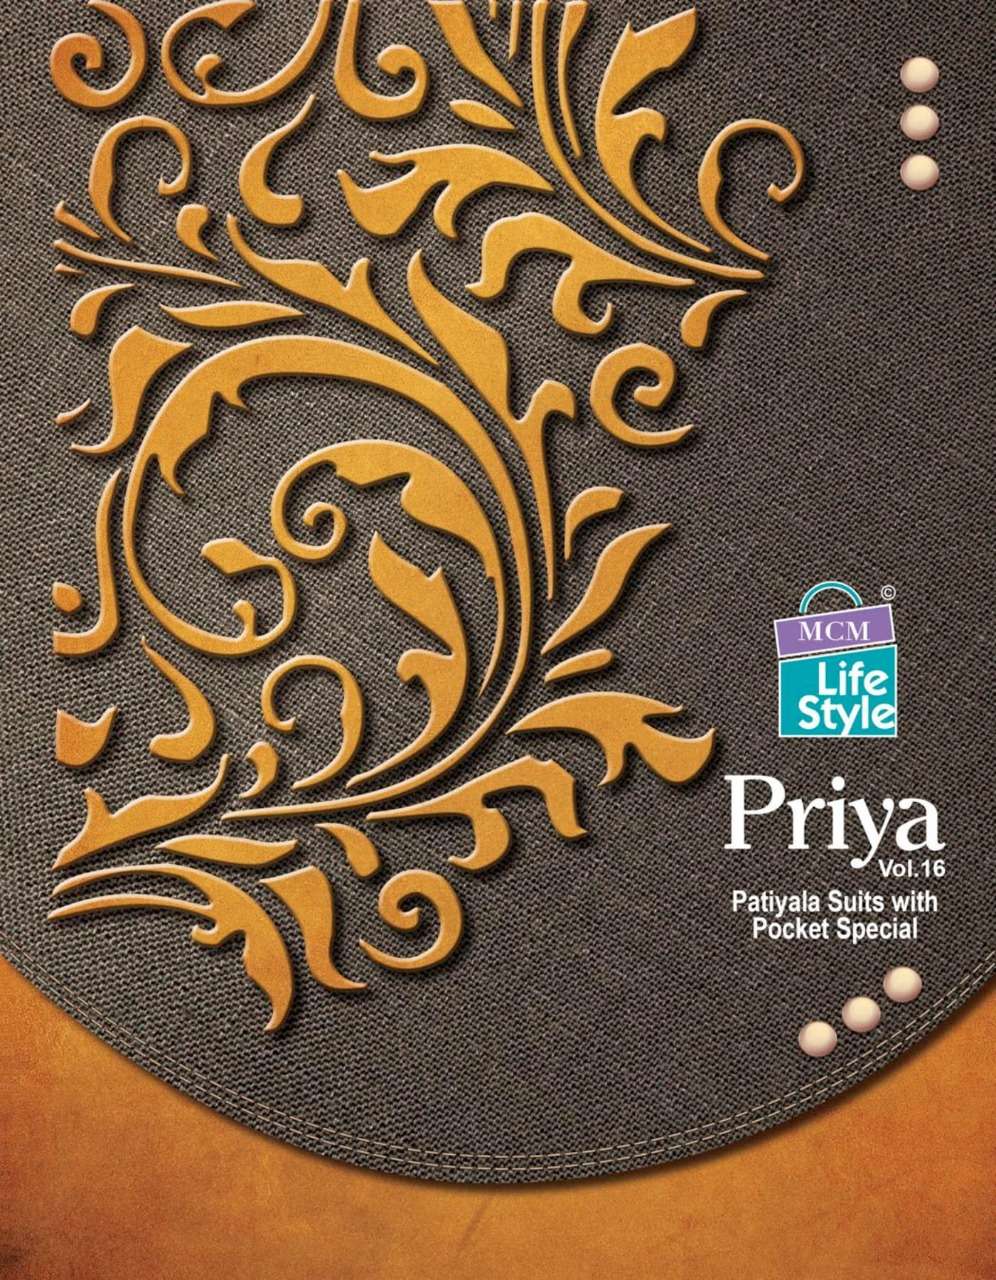 mcm lifestyle priya vol 16 cotton readymade suits at lowest cost 